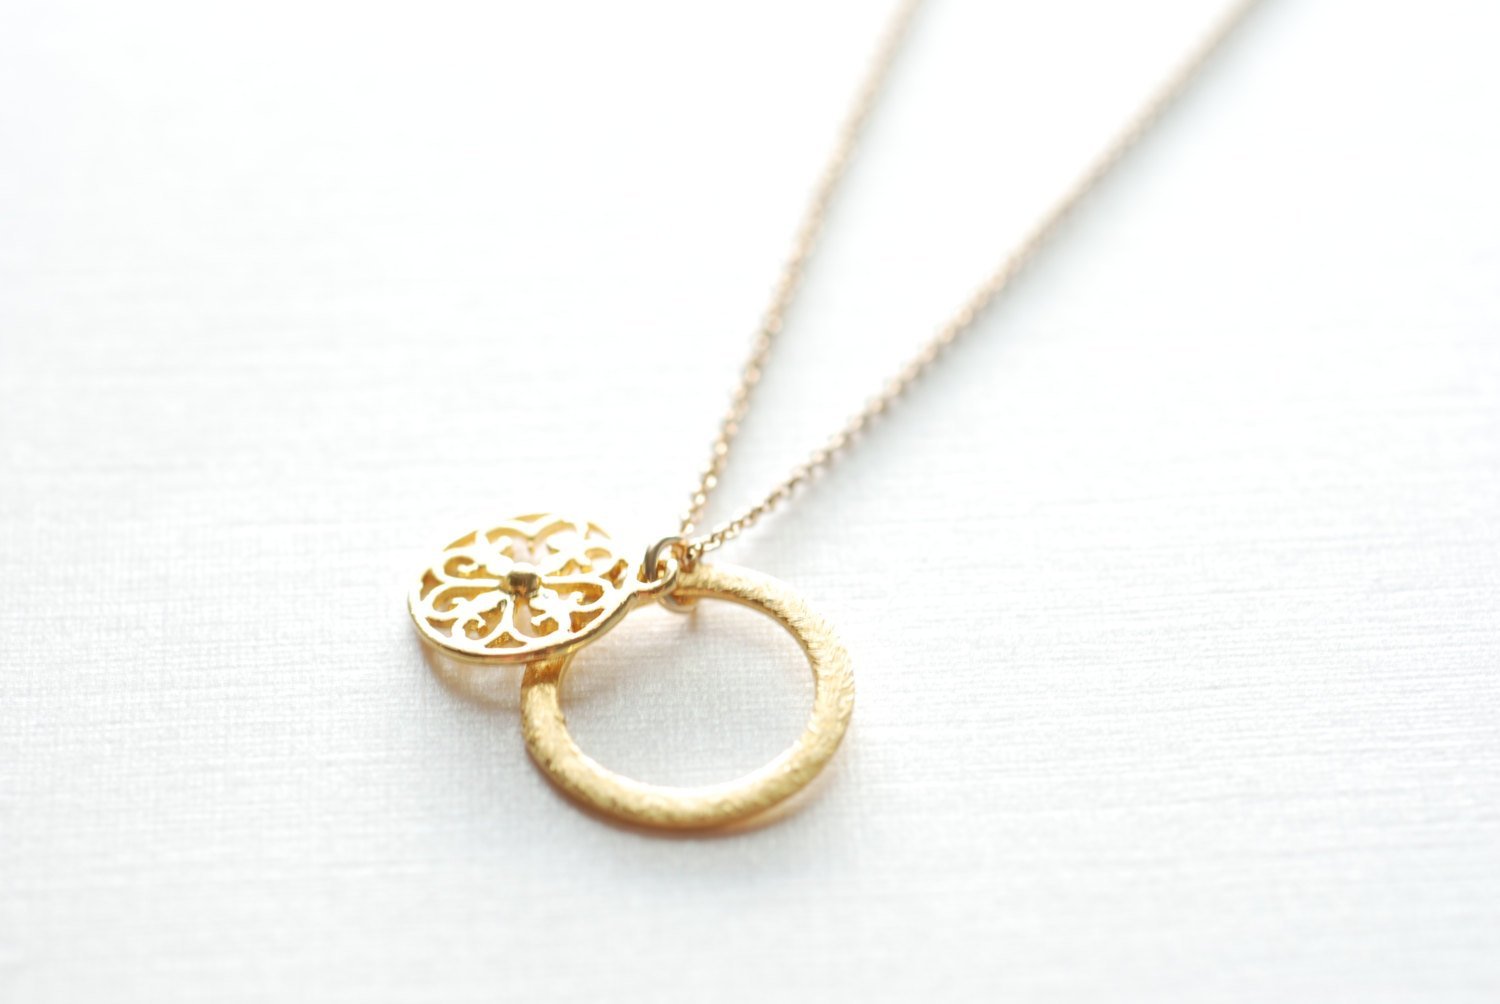 Gold Disc Necklace- Layering Disc Layering Necklace, Gold Filigree Necklace, Round Circle Pendant, Dainty Necklace by Heirloomenvy - HarperCrown